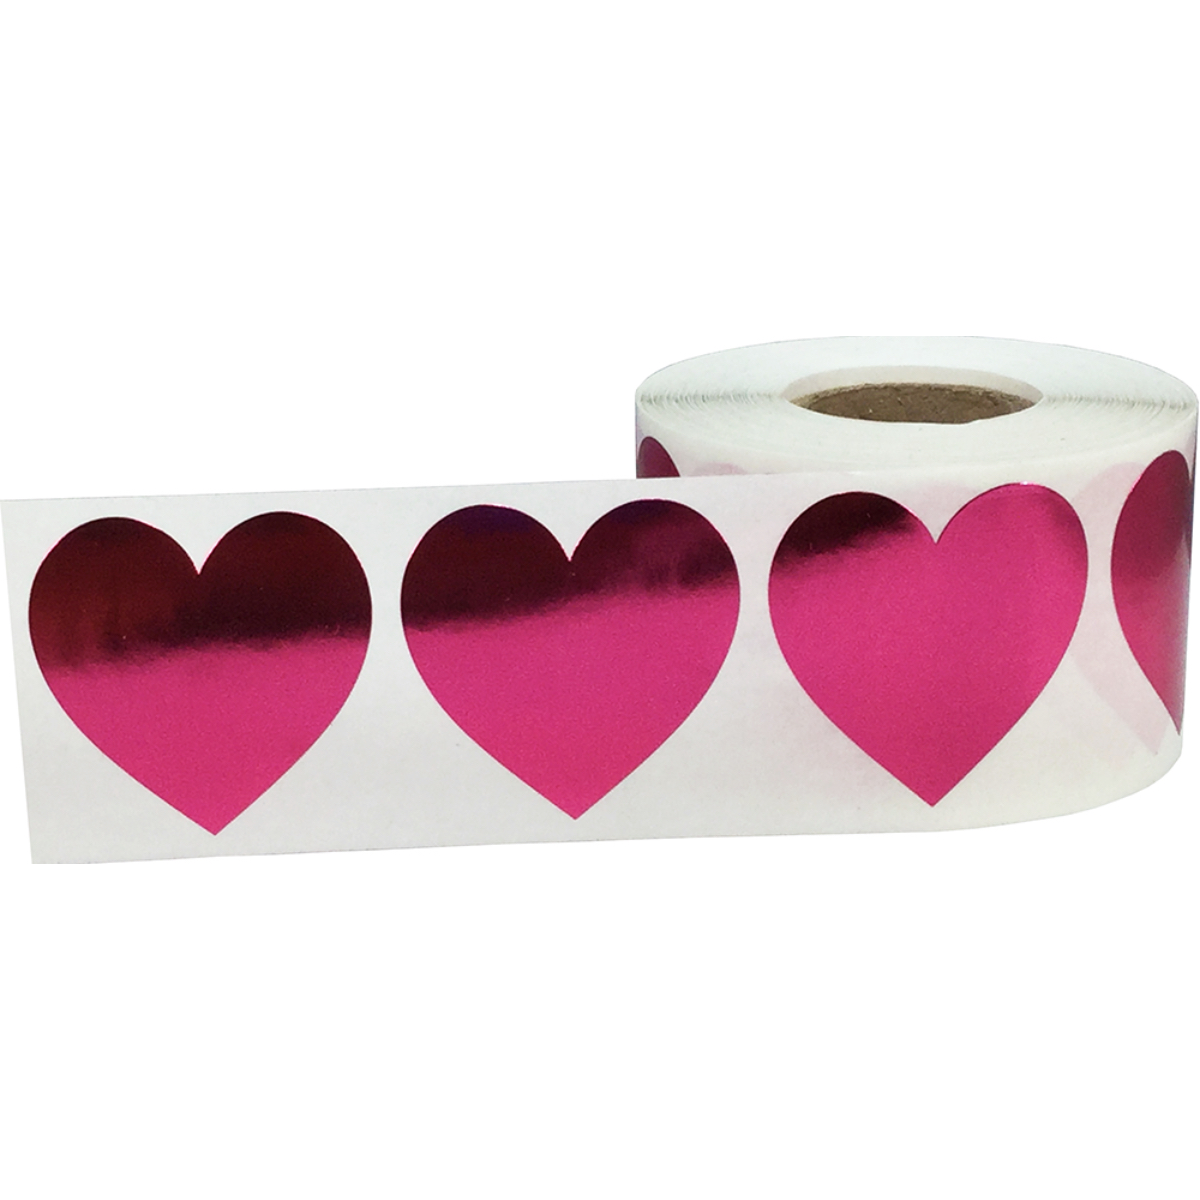 Metallic Rose Heart Stickers | 0.5 Inch Wide | 1,000 Pack